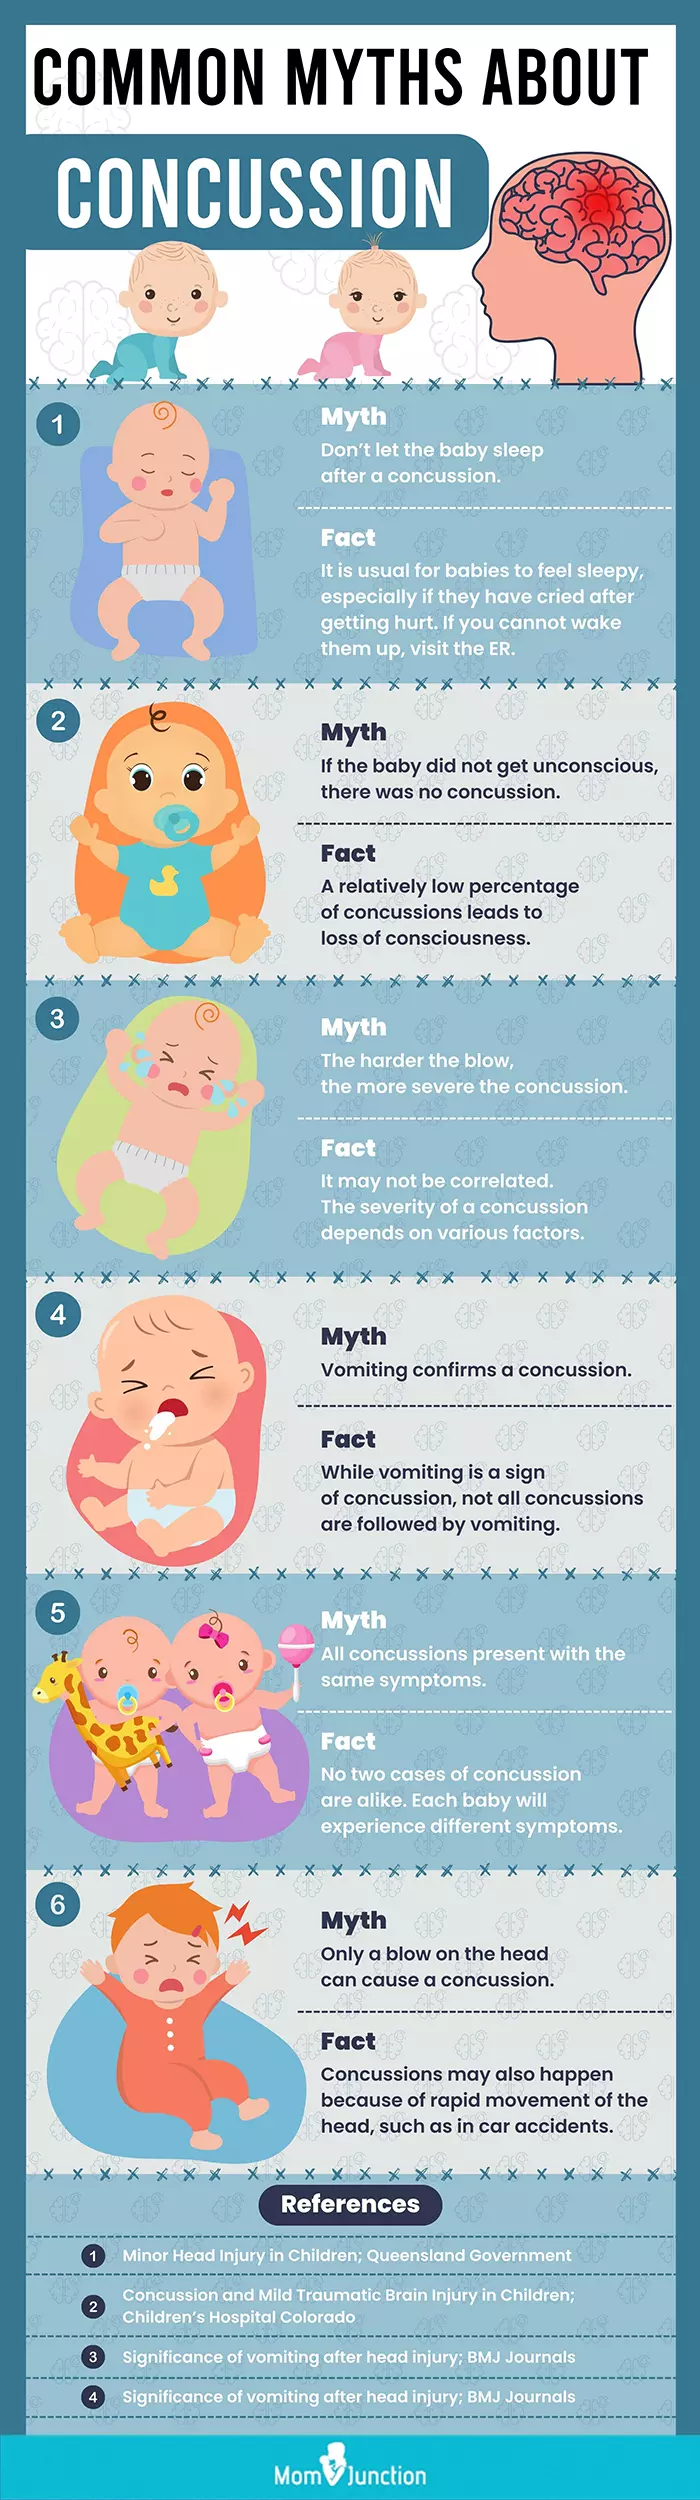 common myths about concussion (infographic)